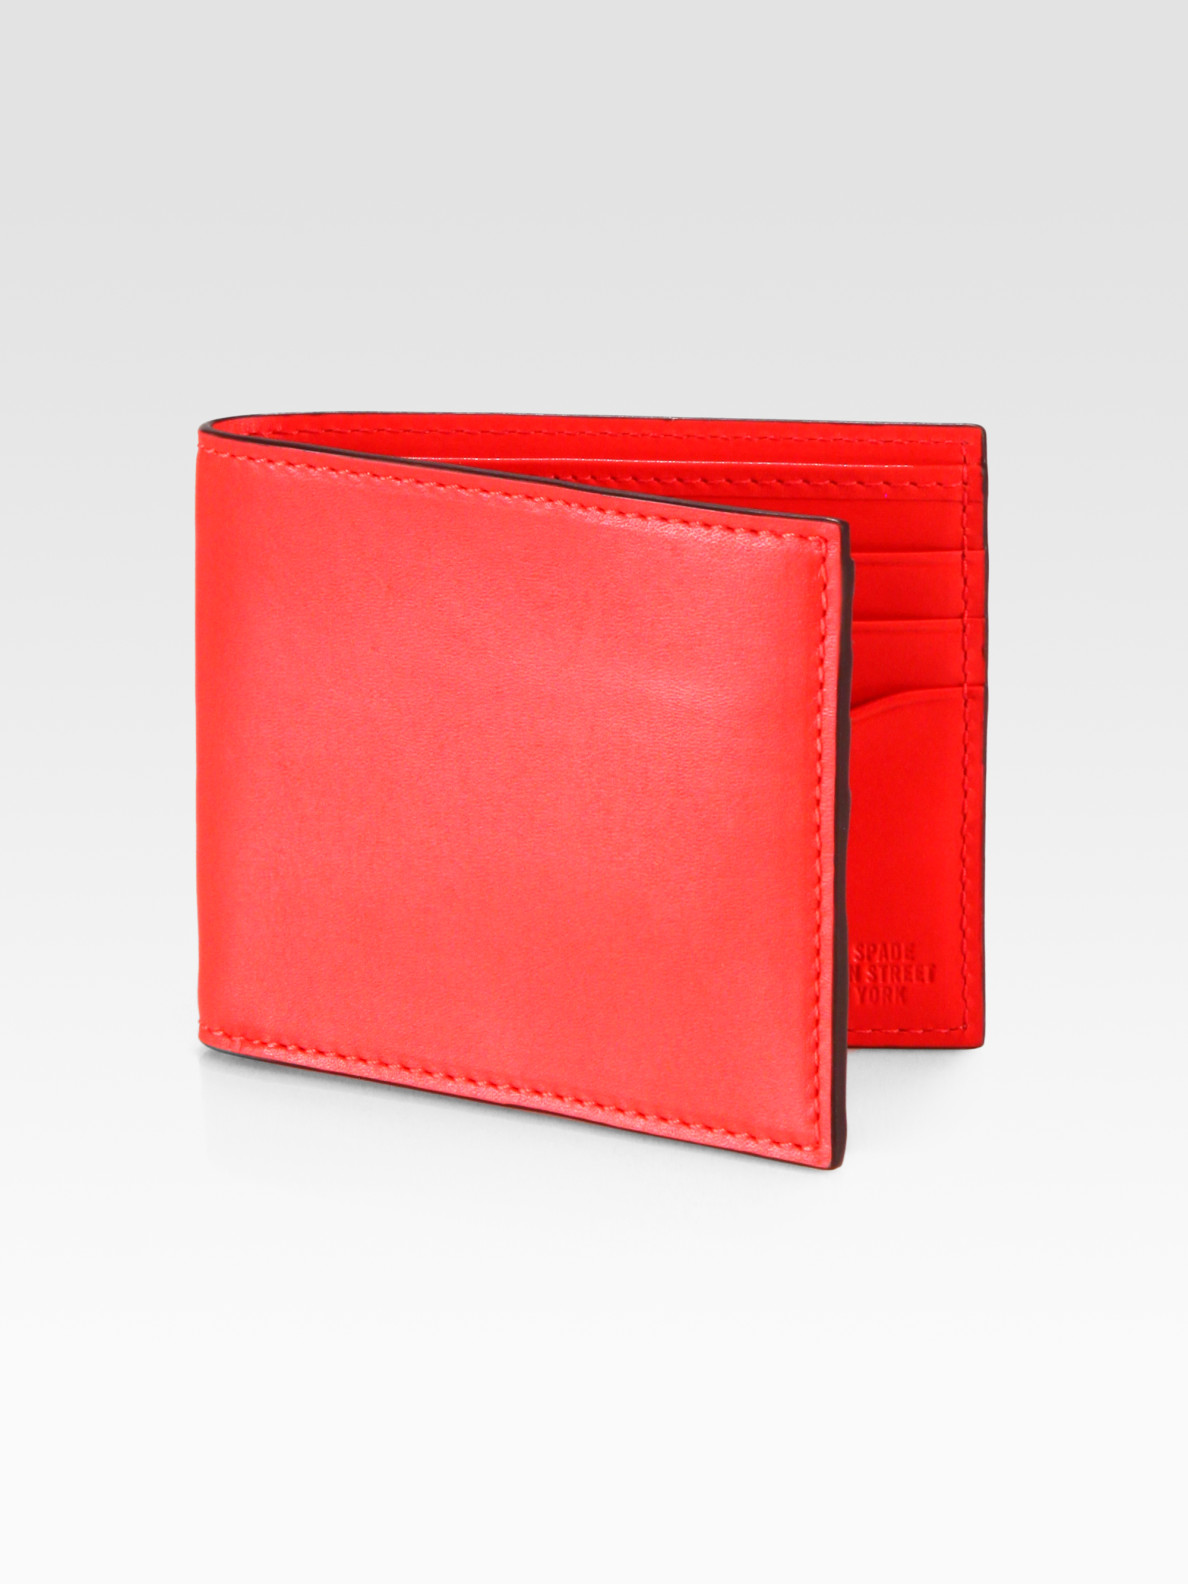 leather wallet red